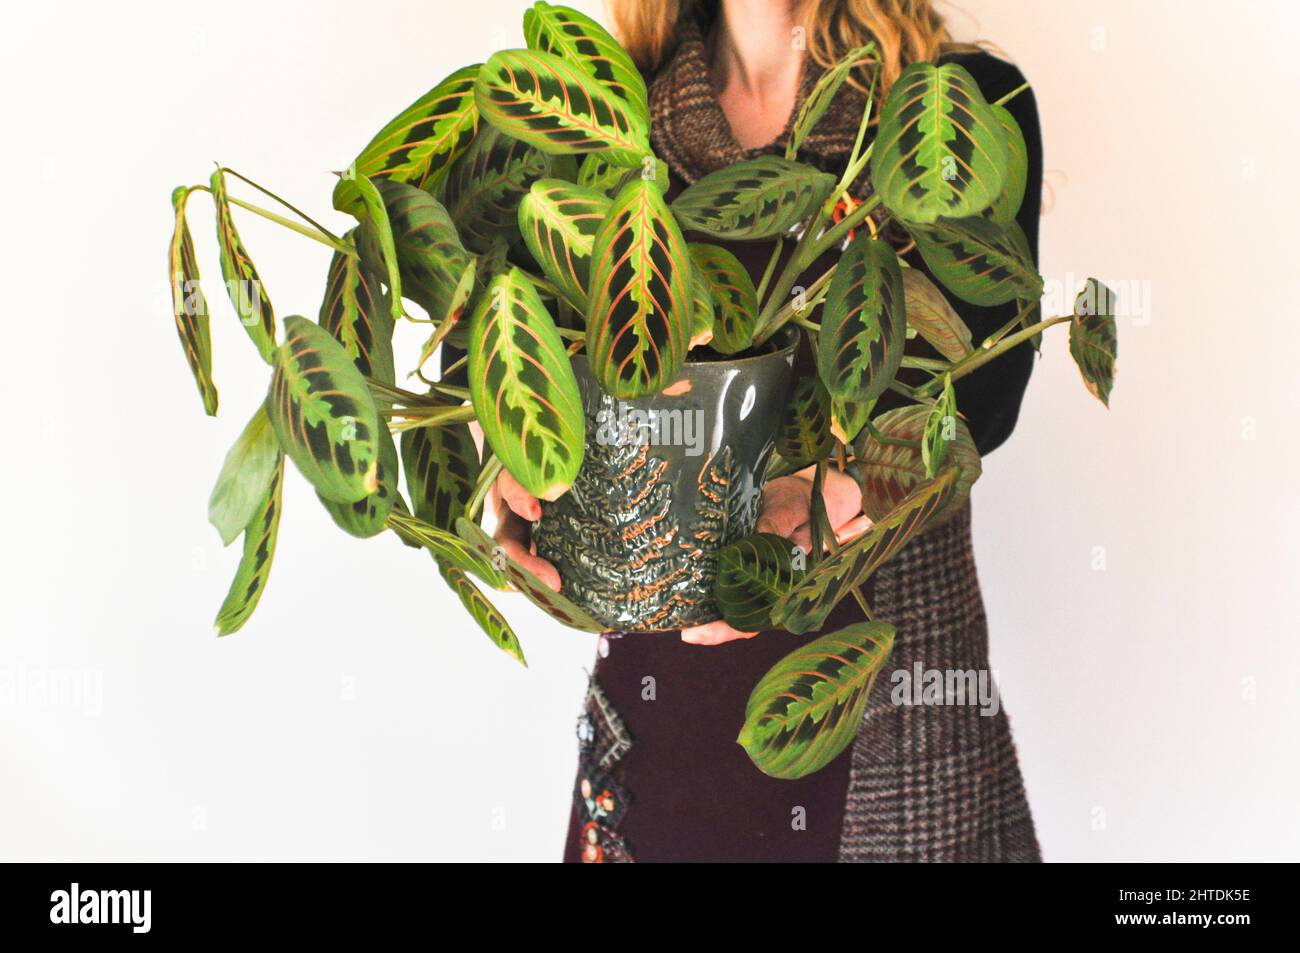 A female holding a healthy prayer plant (Red Maranta Calathea) in front of her Stock Photo